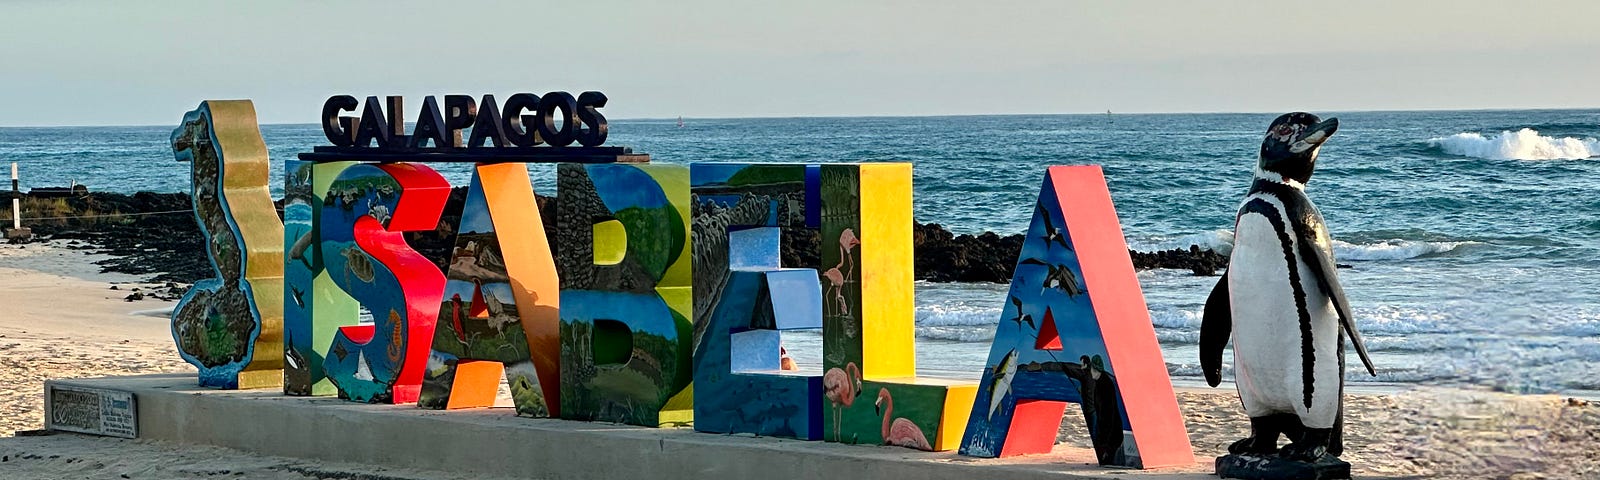 Tall, colorful letters on a white sandy beach spell ISABELA, with a statue of a Galápagos penguin statue on the side.